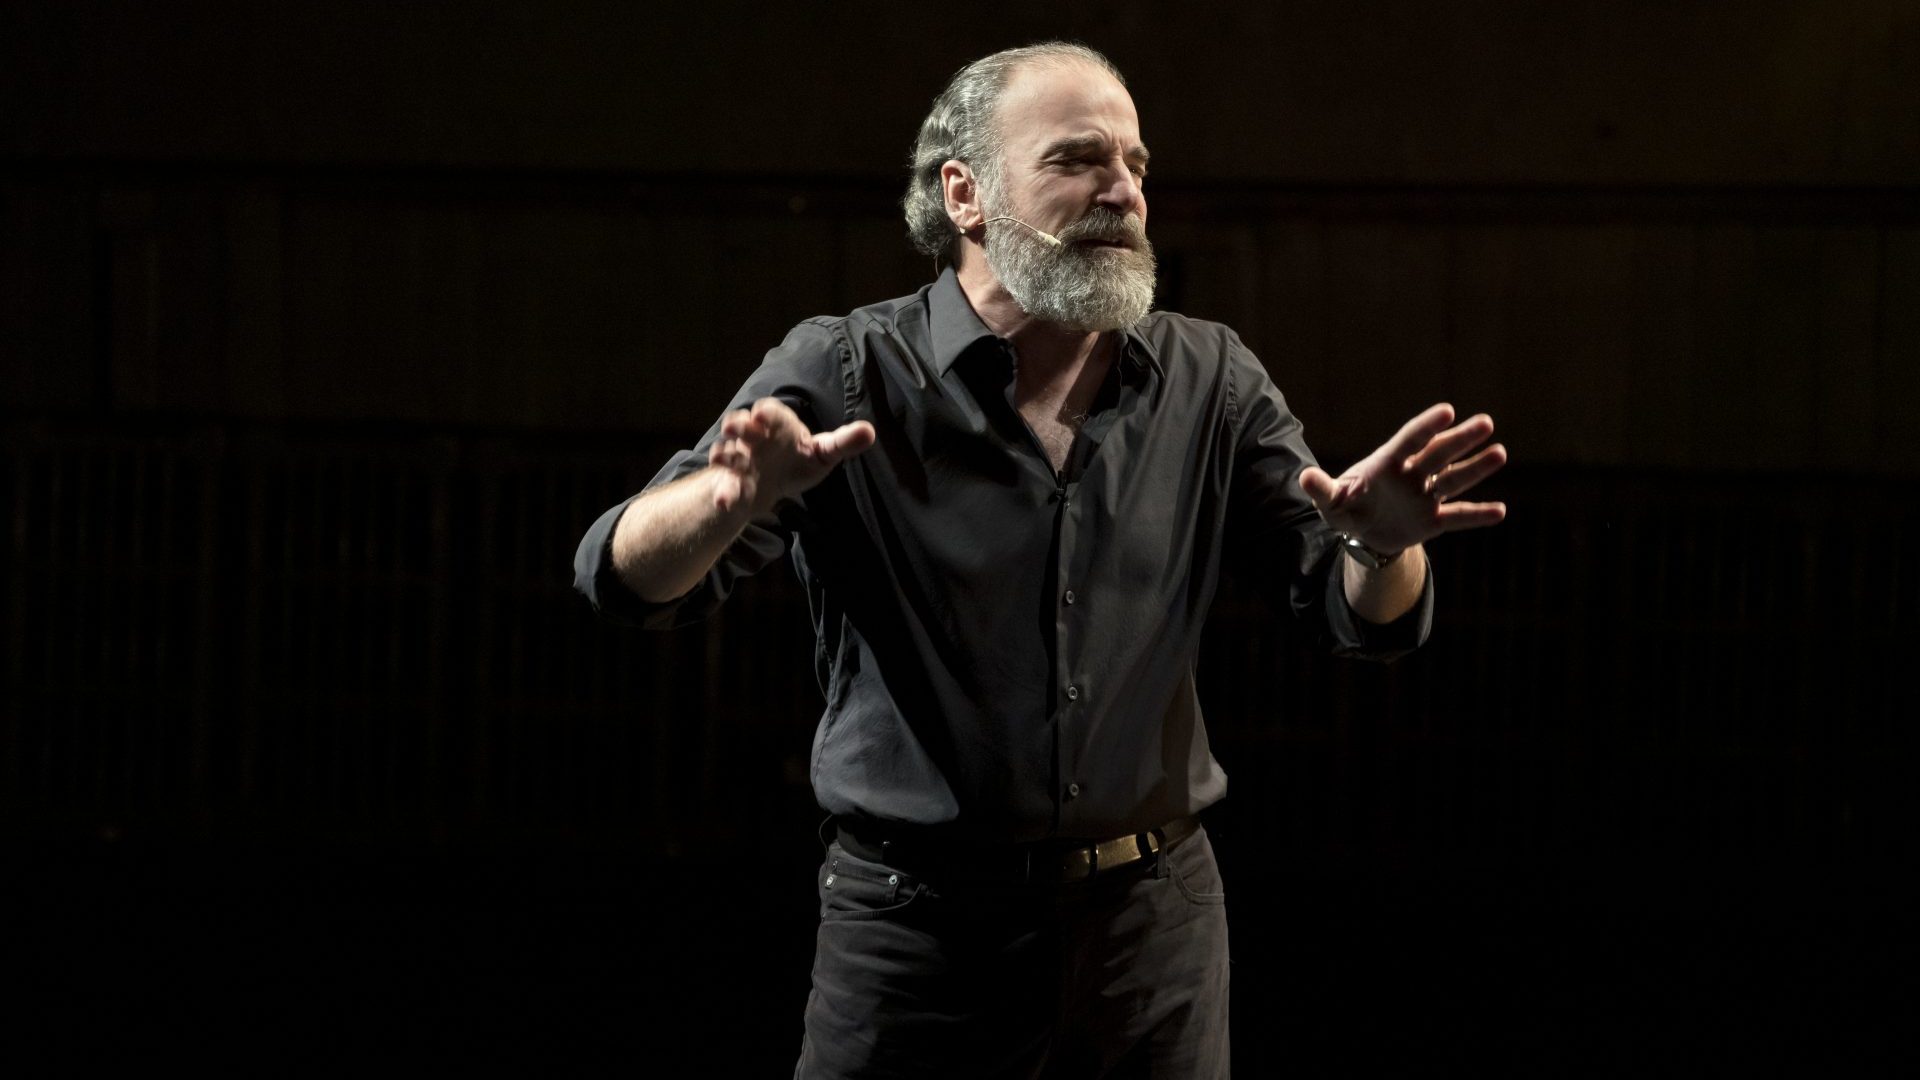 Mandy Patinkin in concert. Photo: Joan Marcus